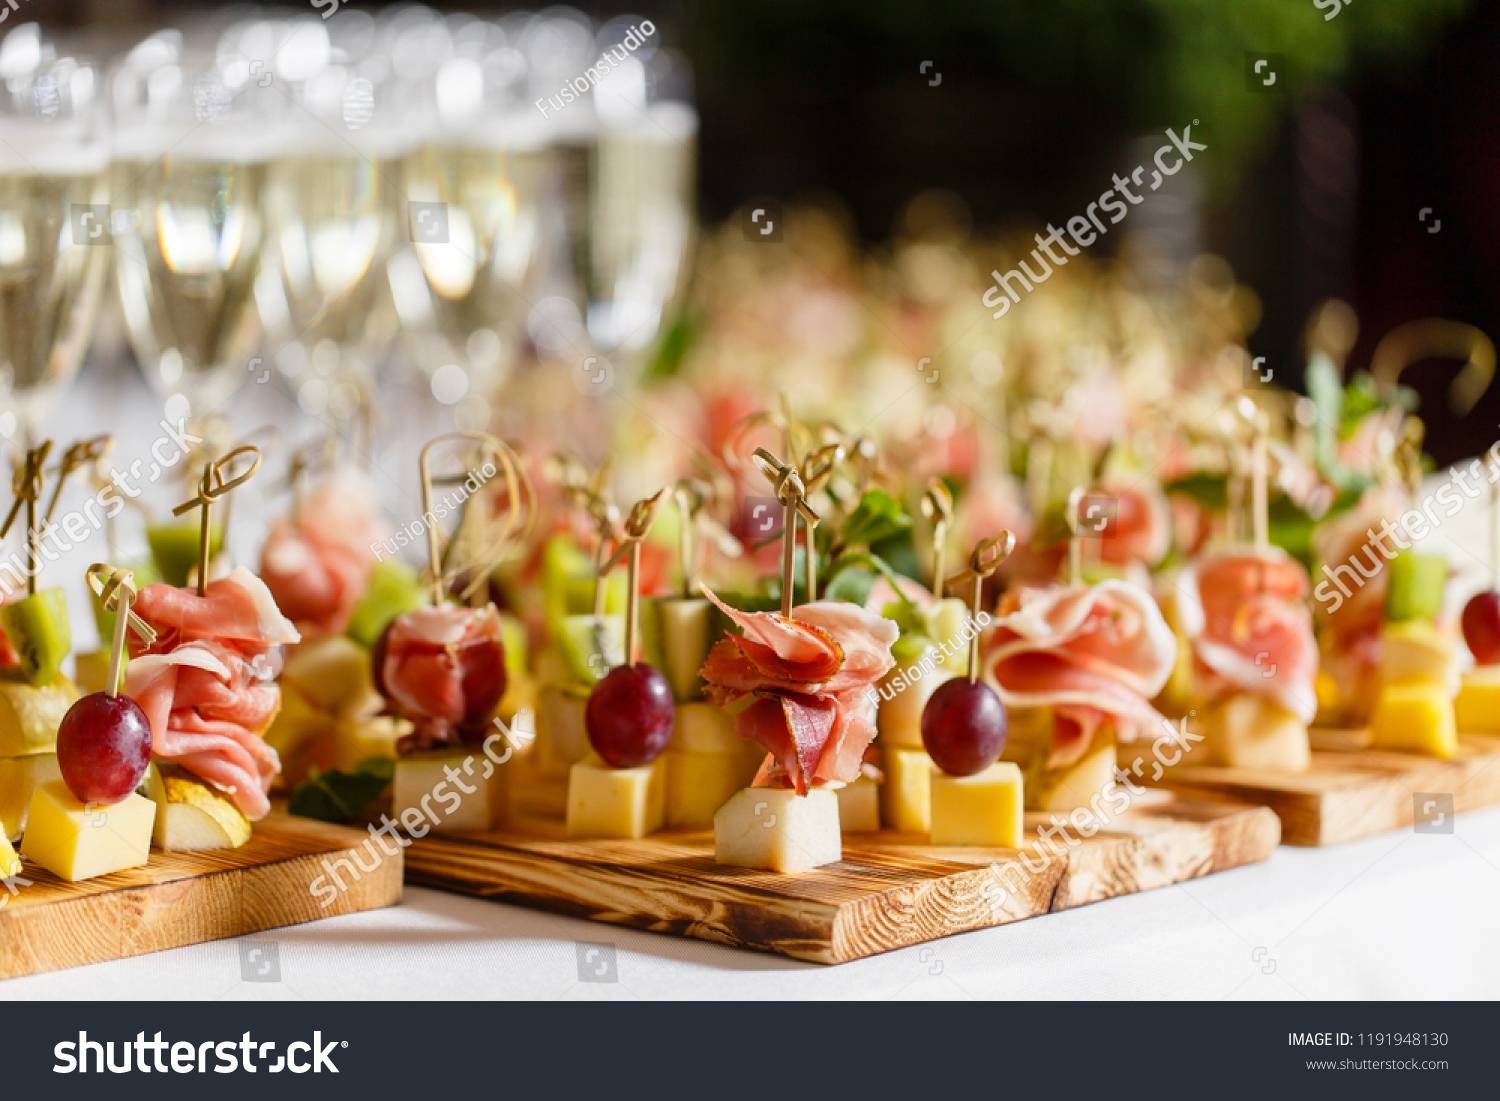 the buffet at the reception. Glasses of wine and champagne. Assortment of canapes on wooden board. Banquet service. catering food, snacks with cheese, jamon, prosciutto and fruit #1191948130